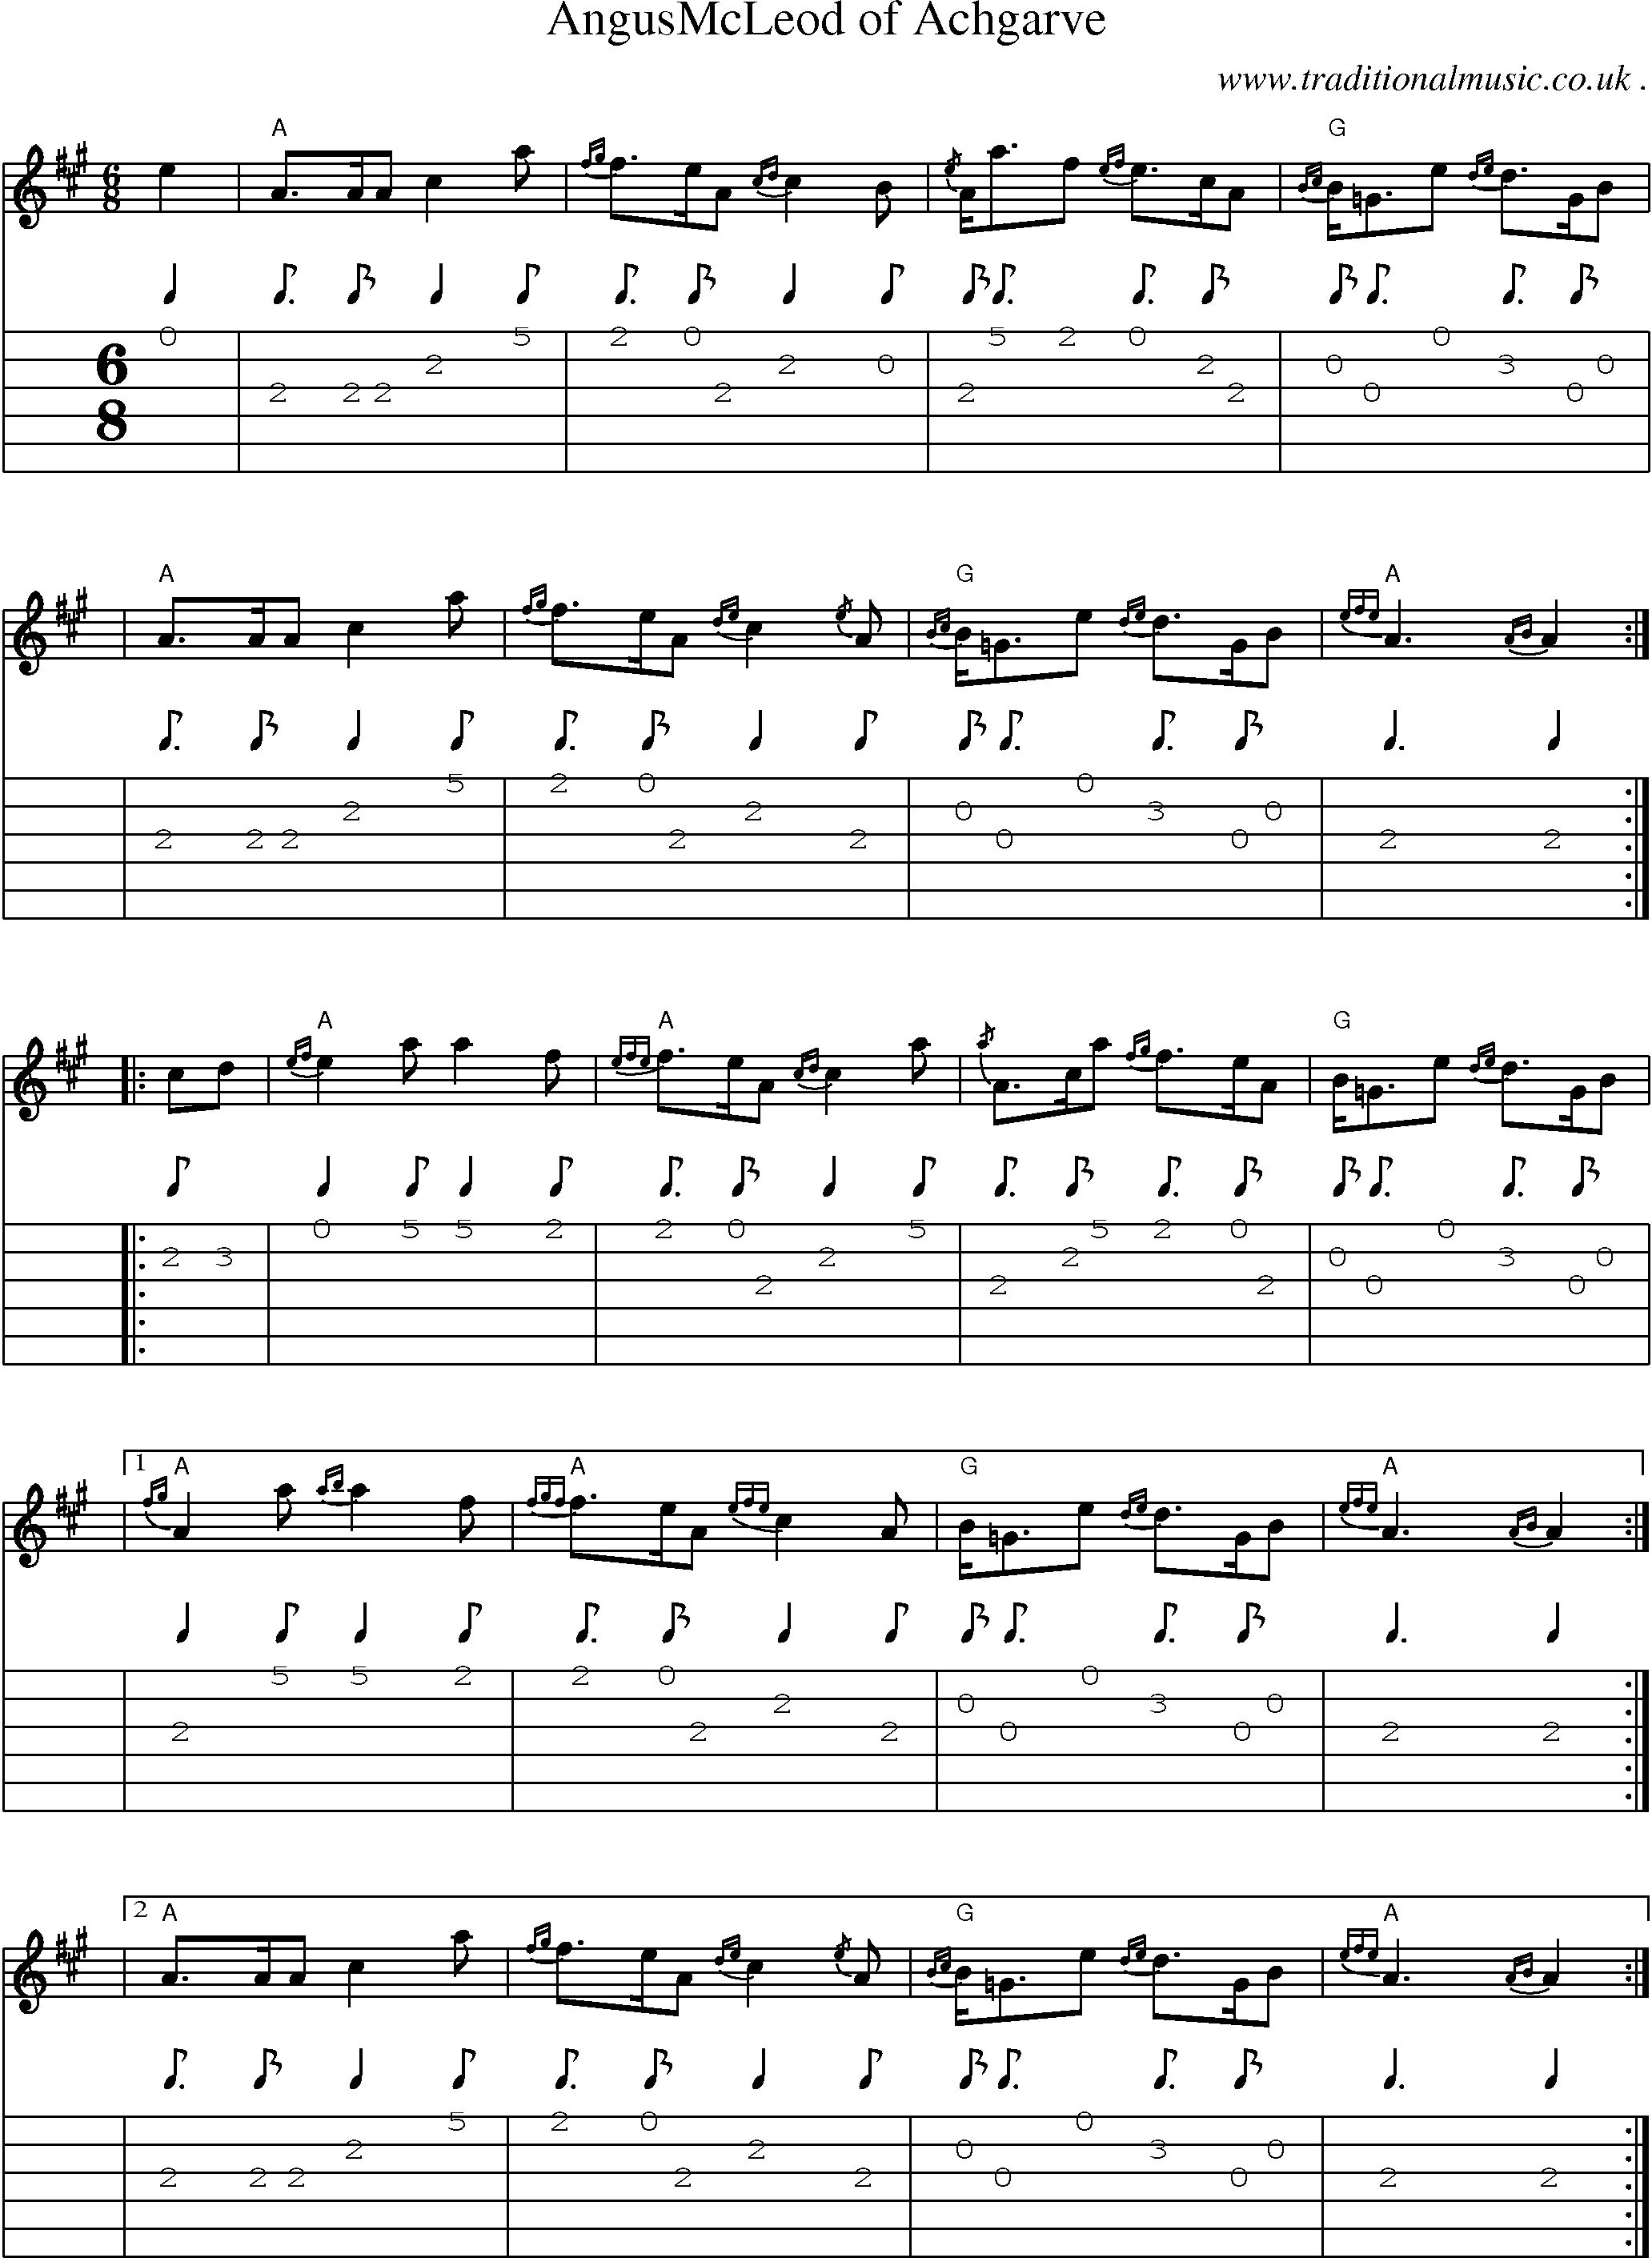 Sheet-music  score, Chords and Guitar Tabs for Angusmcleod Of Achgarve